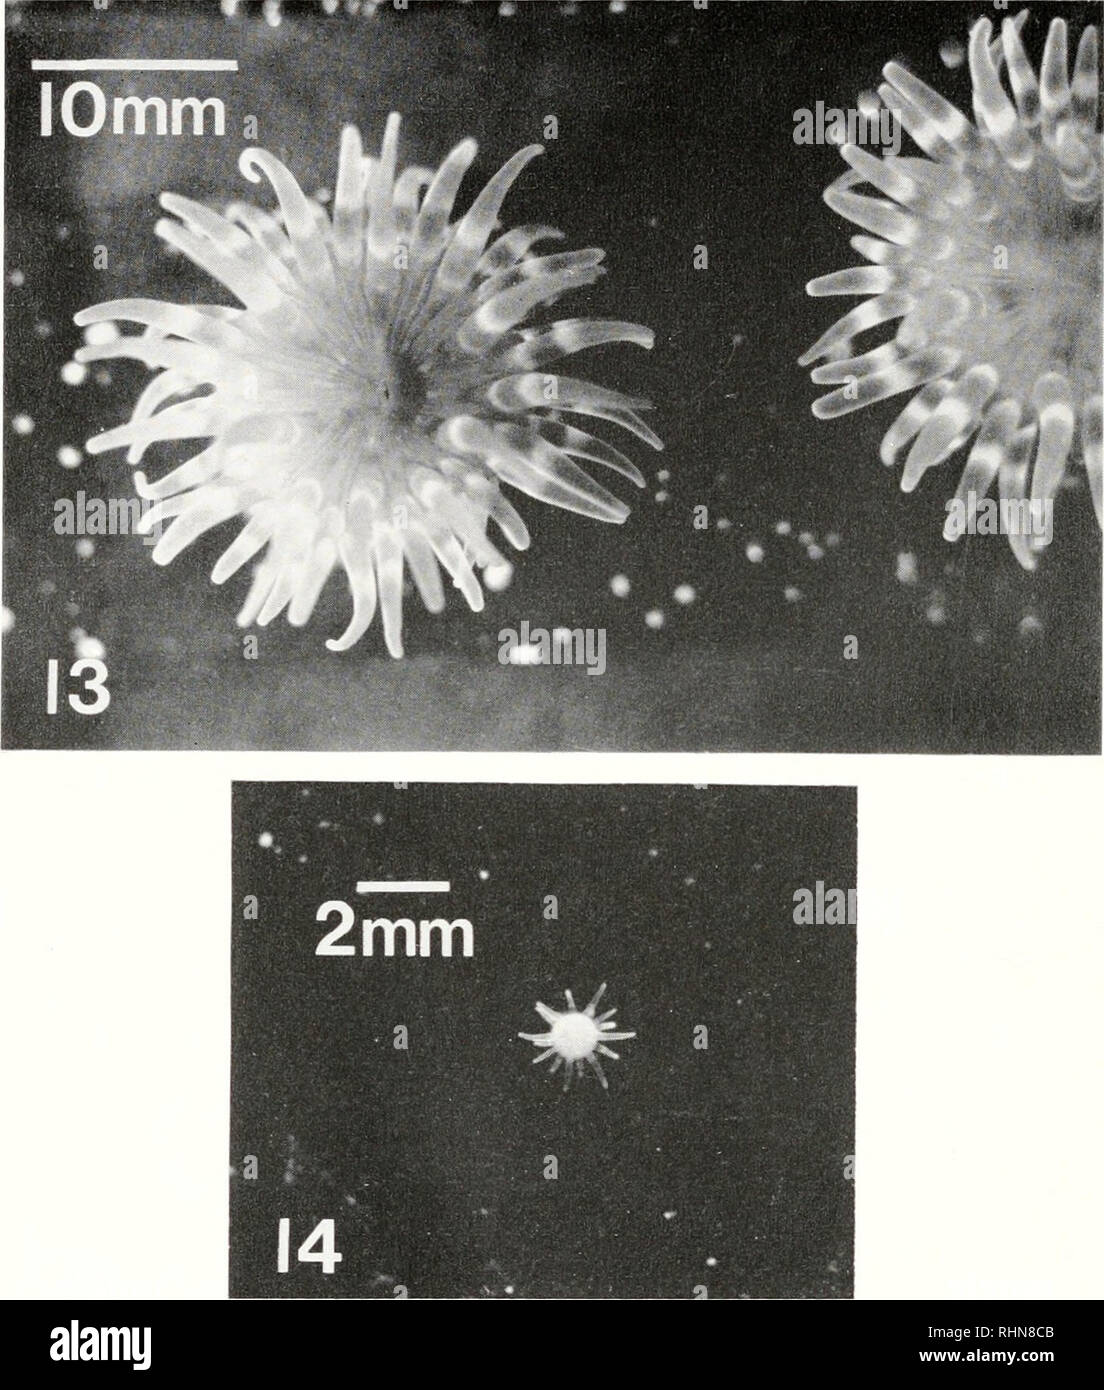 . The Biological bulletin. Biology; Zoology; Biology; Marine Biology. 214 FU-SHIANG CHIA AND JAMES G. SPAULDING. FIGURE 13. 14 month old anemone when fed in the laboratory. FIGURE 14. 14 month old anemone, when starved for the last 9 months. in the low interticlal and subtidal. Its base is broad (10 to 15 cm in diameter) and strongly adherent. The column is stout and cylindrical. The color varies from a yellow-brown to green and may have irregular red patches. Weakly developed verrucae may cover the column in regular rows, and are generally the same color as the column. In some specimens the v Stock Photo